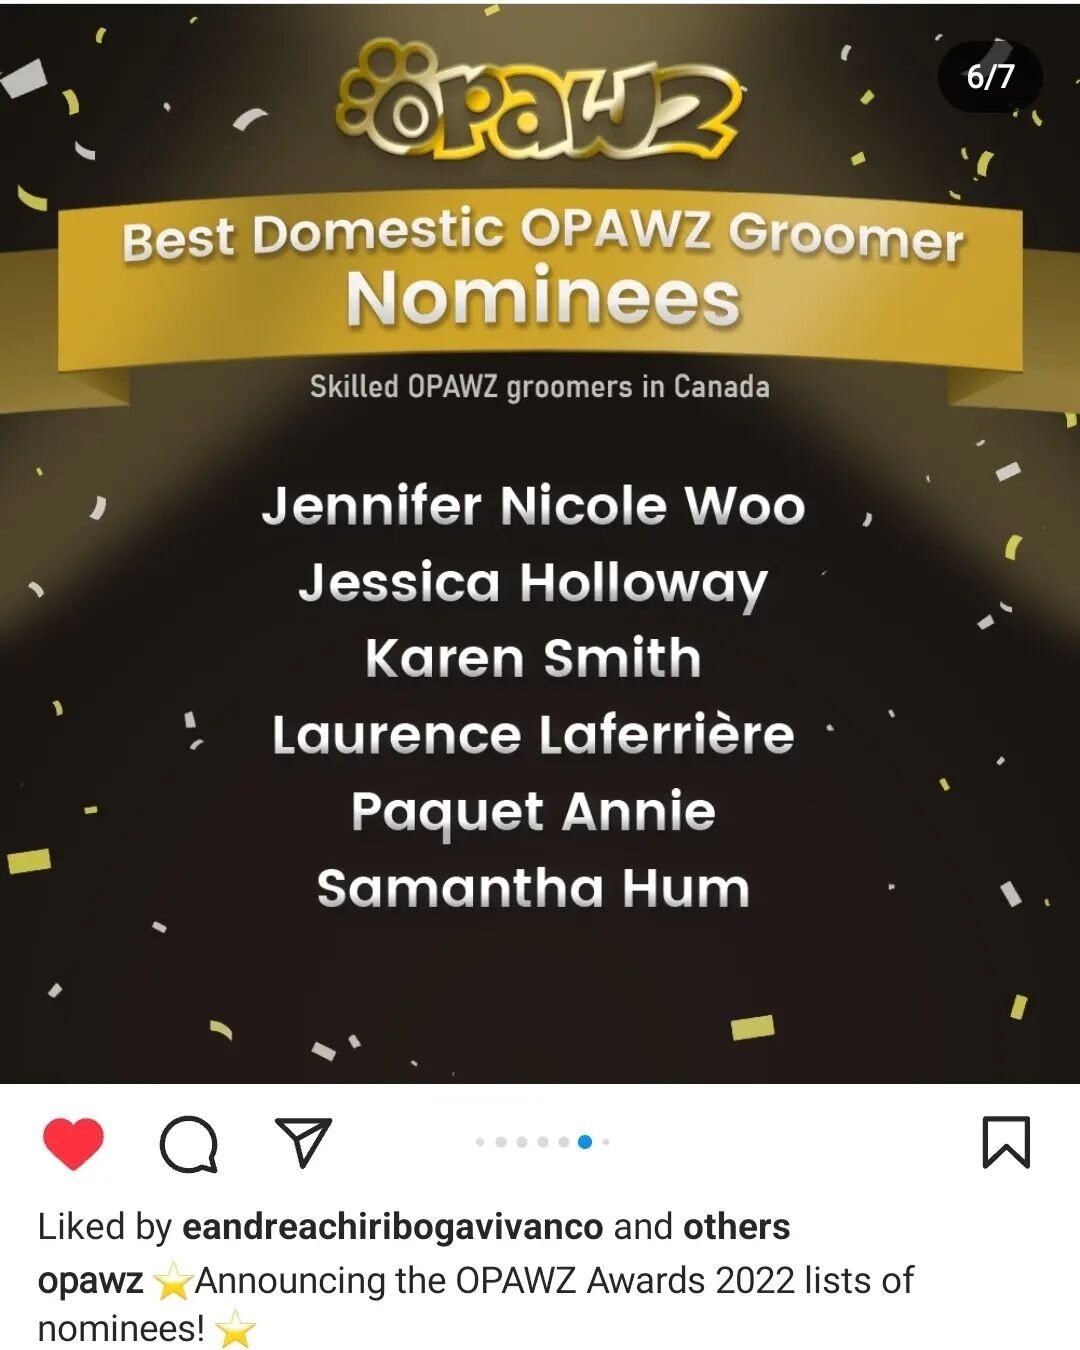 Wow! @opawz how incredibly grateful I am to be nominated on a list with so many incredible groomers! 

I have been so focused on running my business and educating for cooperative care grooming, that my muse and grooming partner (my poodle Candy) has 